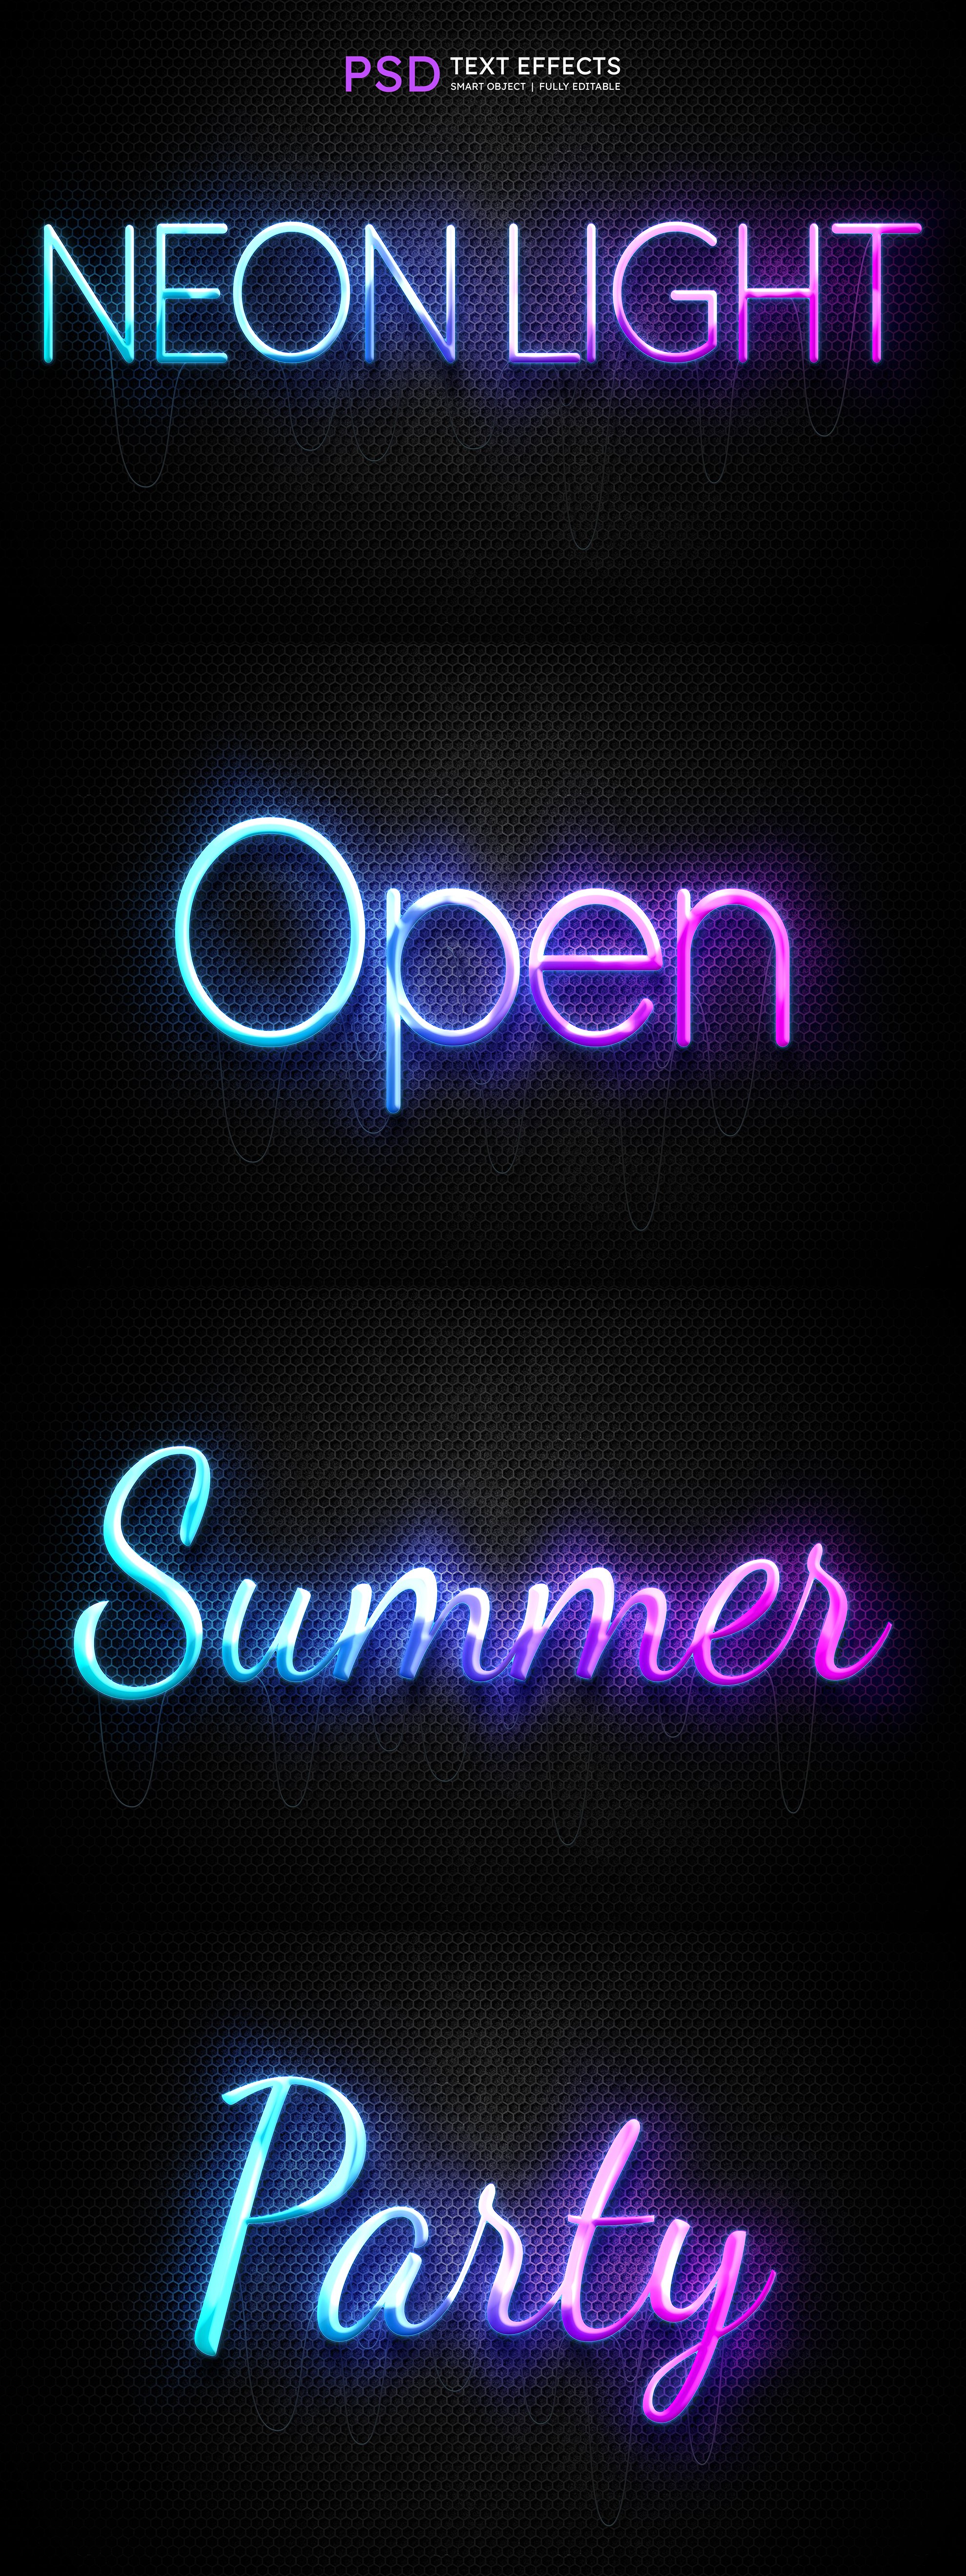 Neon Text Effect Stylecover image.